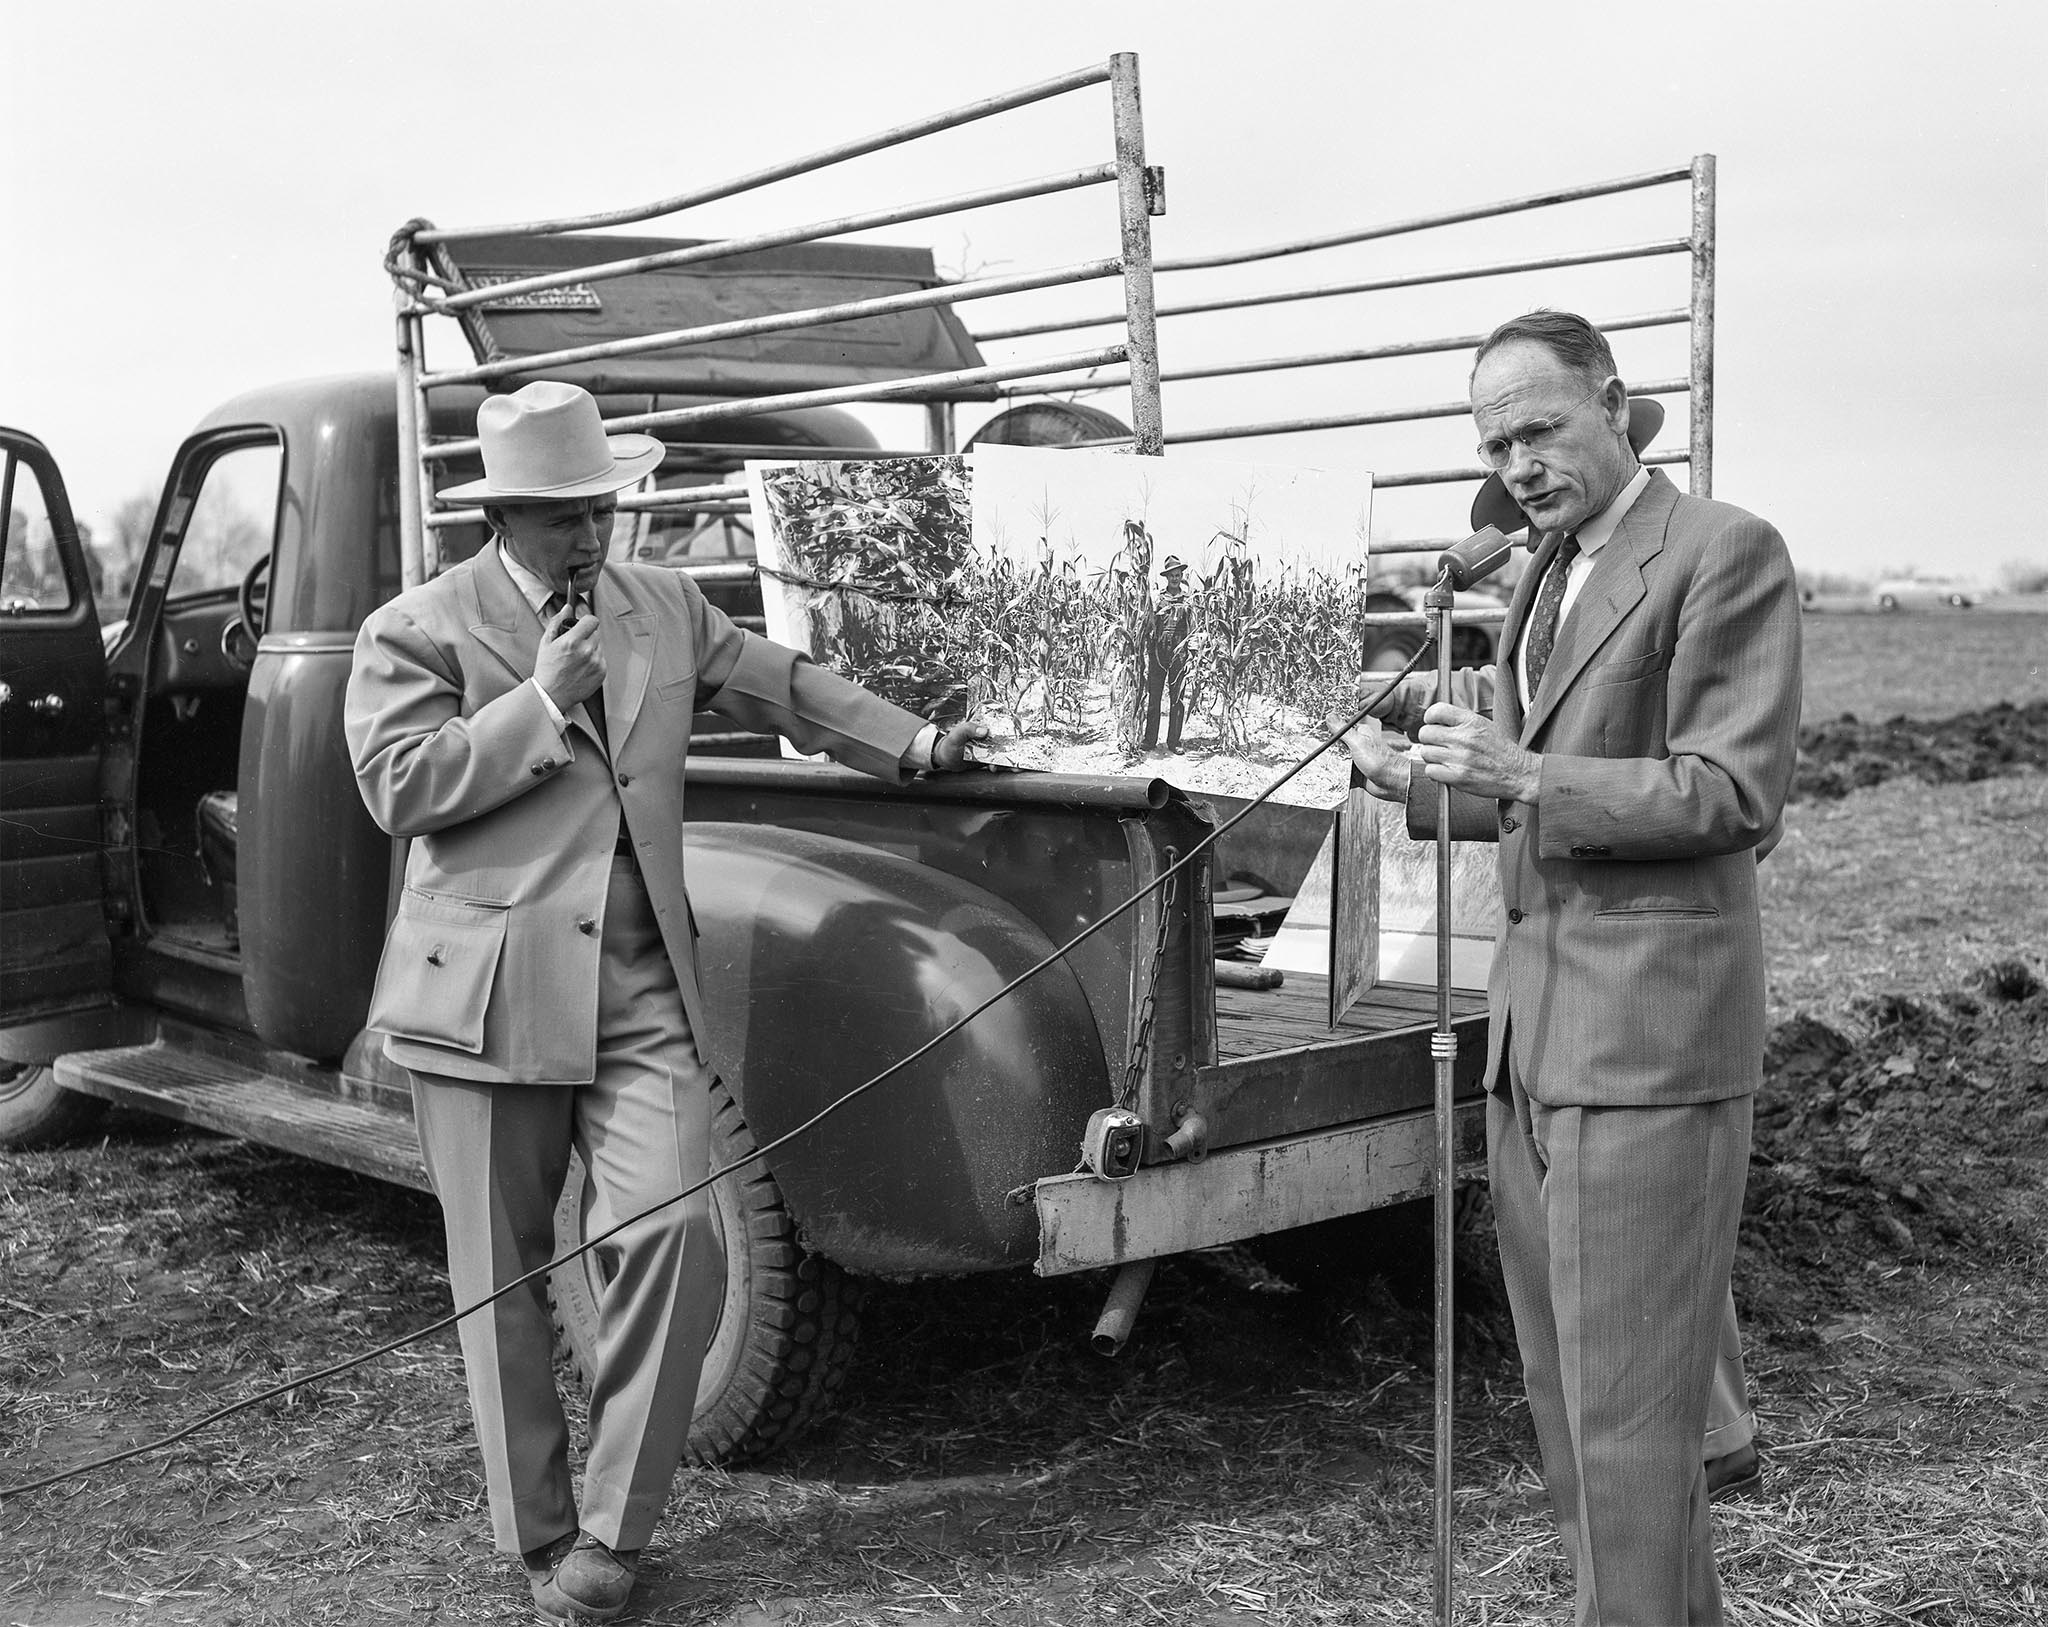 Pontotoc County Farm Bureau held this field day in 1953 at their demonstration farm to show local farmers new agricultural practices.